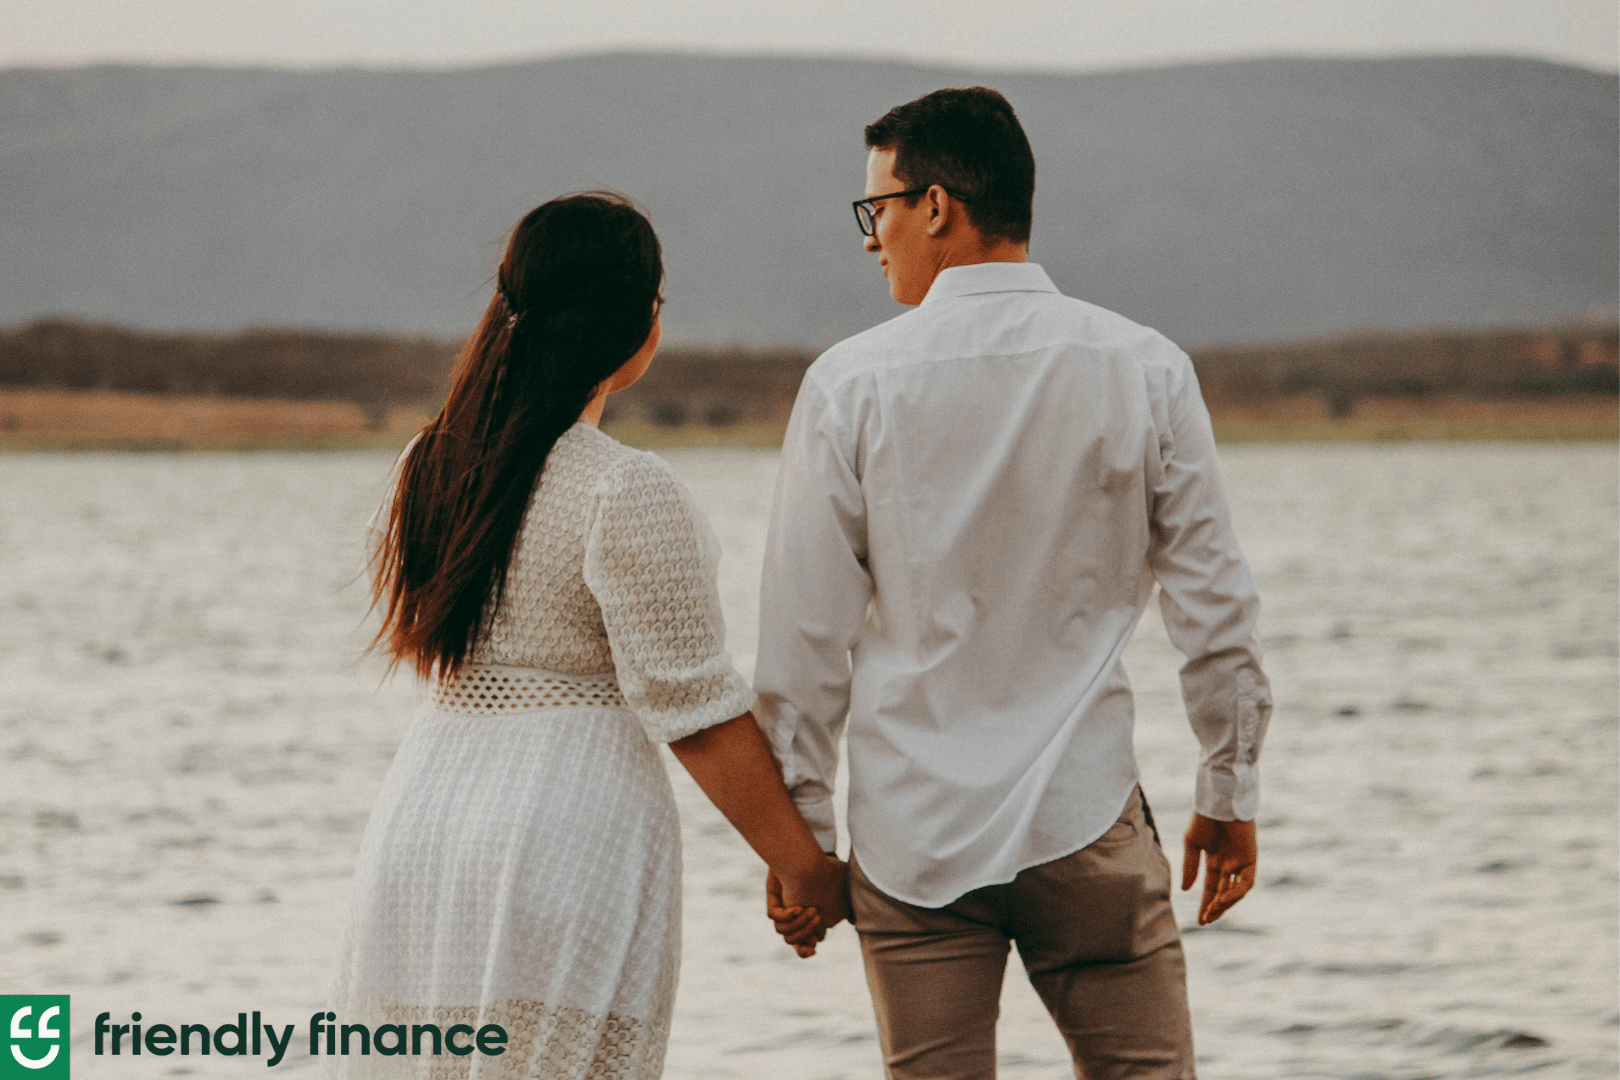 Financial Planning for Newlyweds Merging Finances and Goals